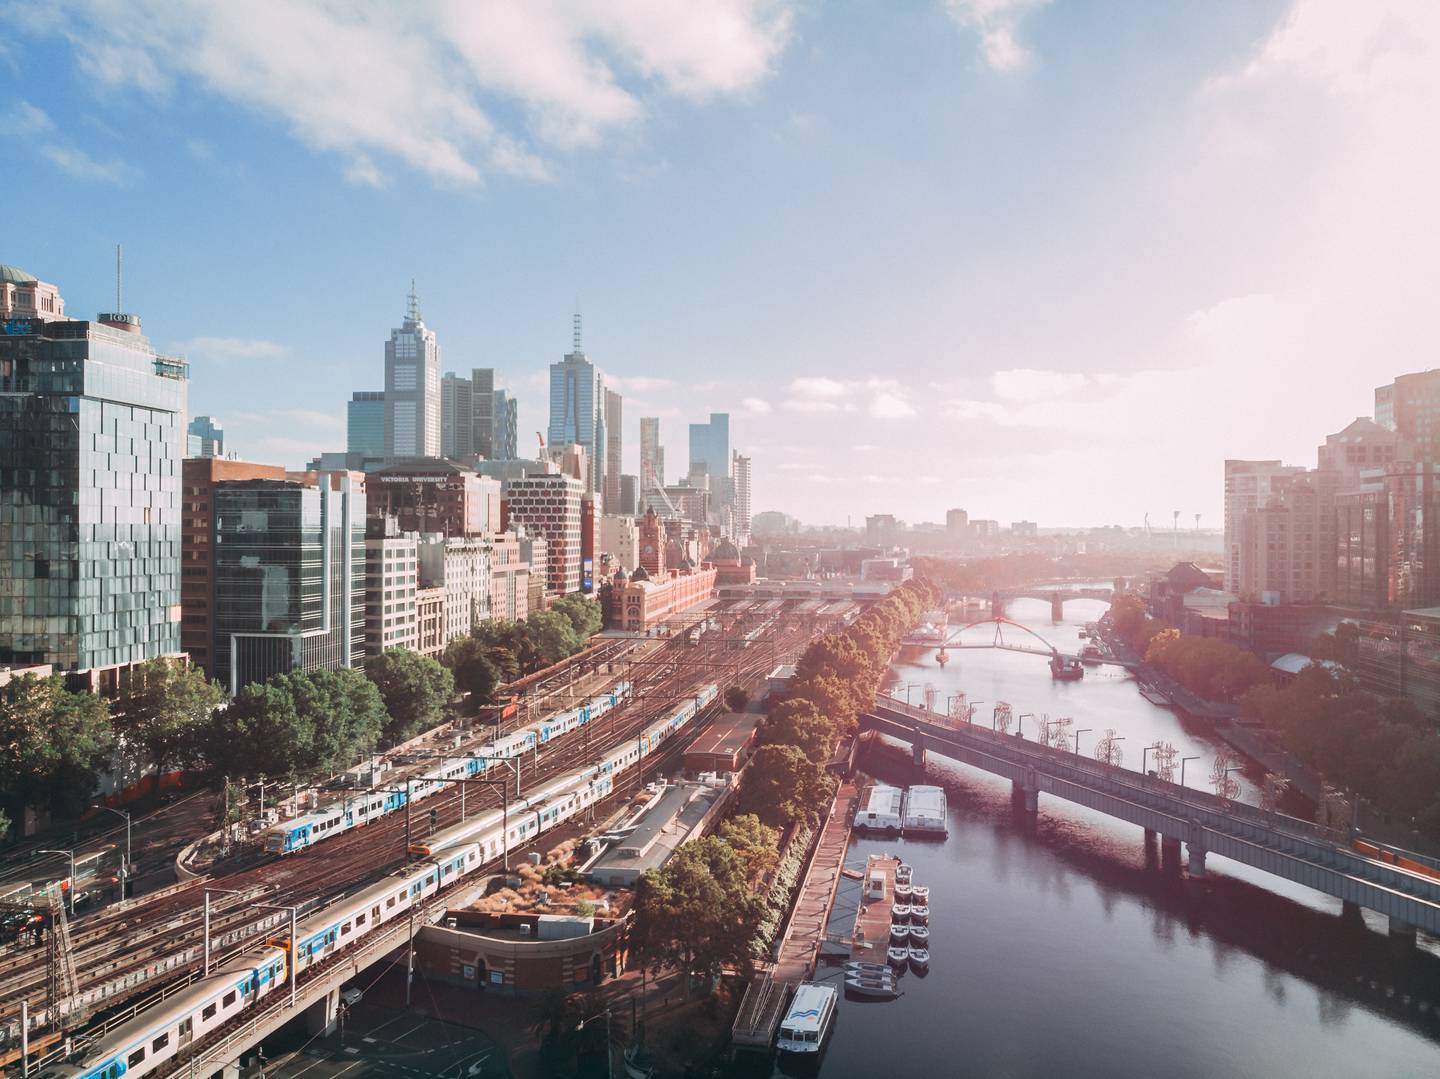 UAE travellers have been booking flights to Melbourne since Australia announced it was opening to tourists this month. Unsplash / Dmitry Osipenko